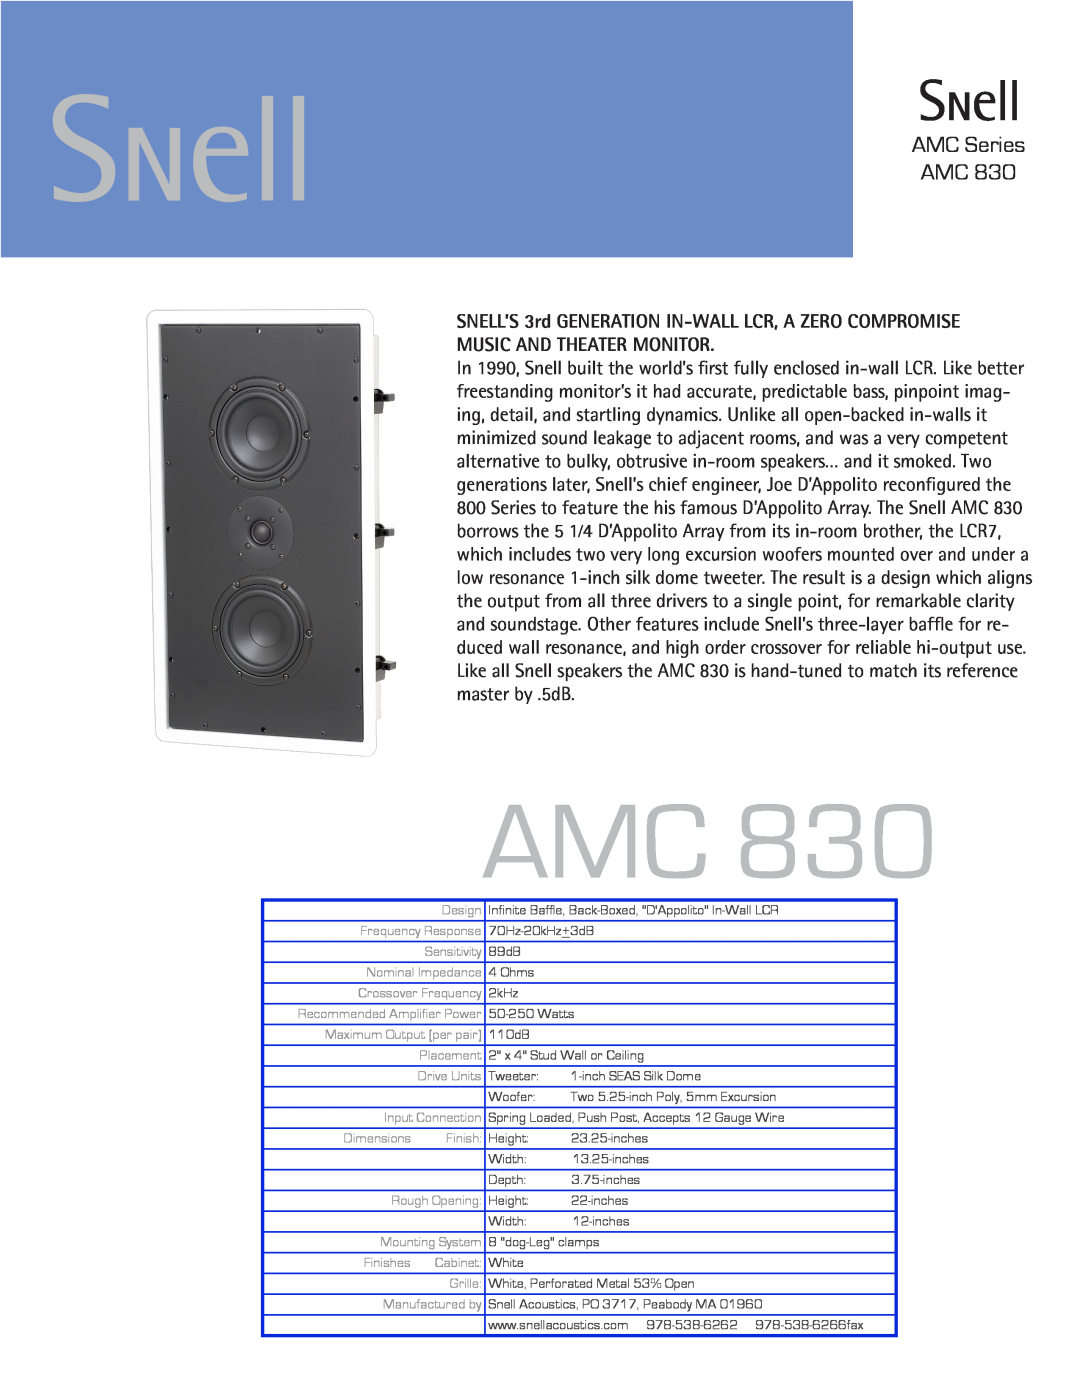 Snell Acoustics AMC 830 dimensions AMC Series AMC, Music And Theater Monitor 